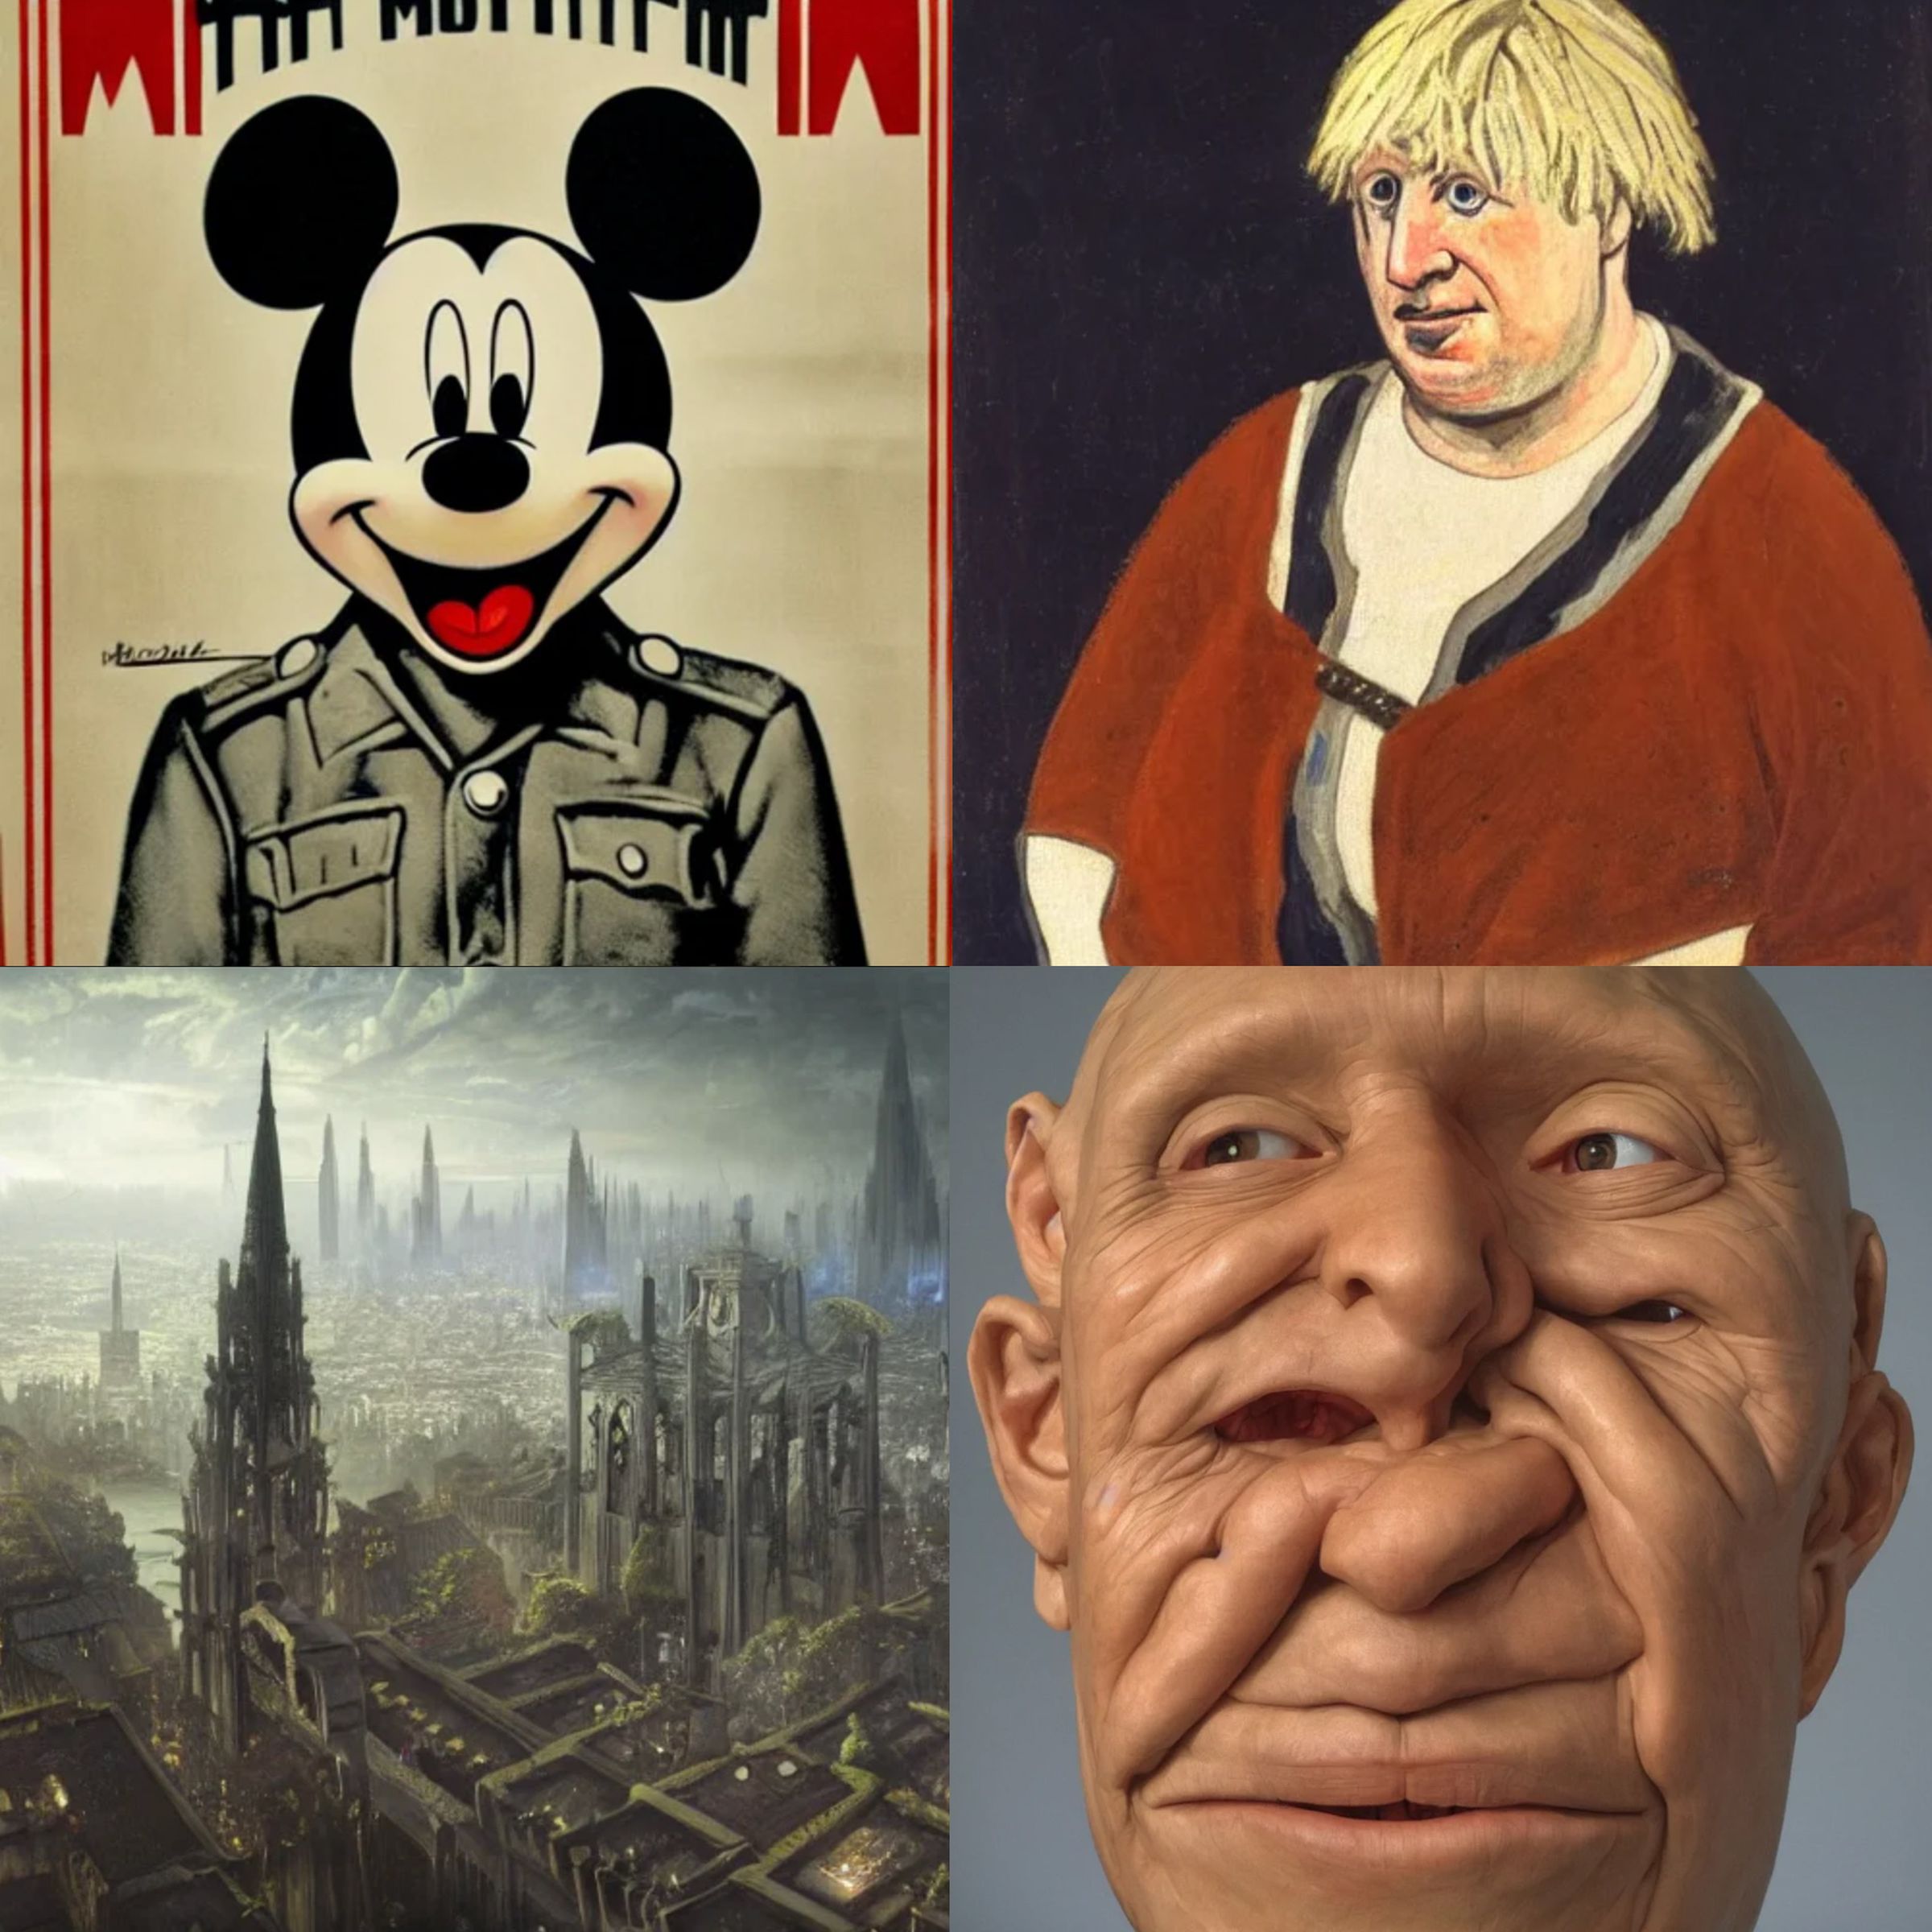 Stable Diffusion is notable for the quality of its output and its ability to reproduce and combine a range of styles, copyrighted imagery, and public figures. Top-left is “Mickey Mouse WW2 Propaganda poster,” and top-right is “Boris Johnson as 12th century peasant, oil painting.”